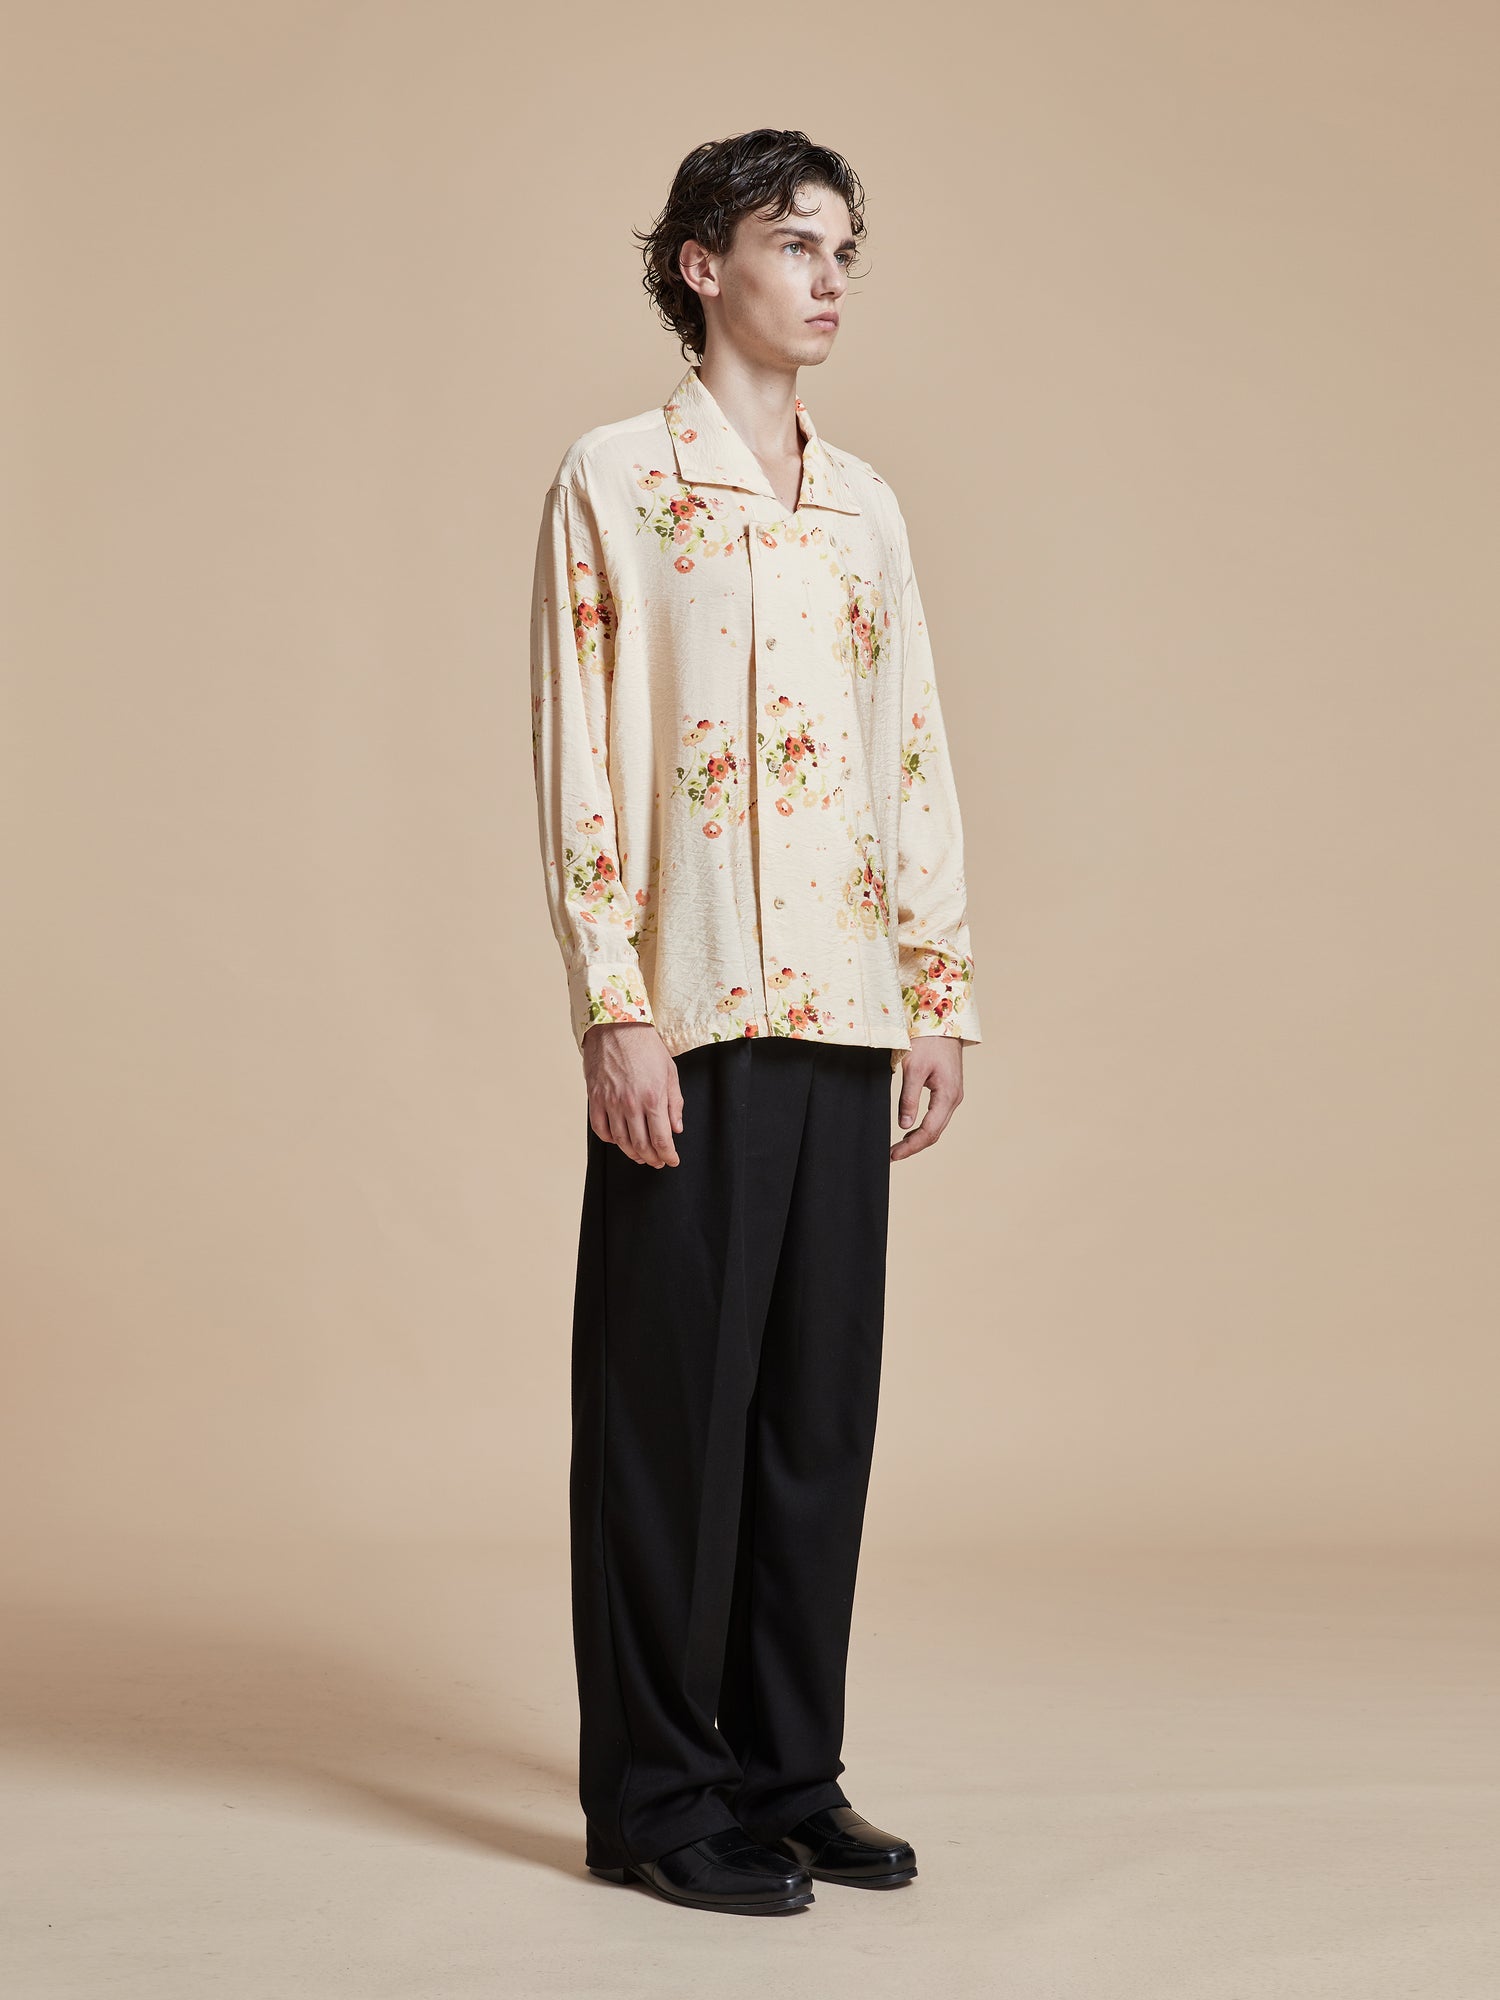 A model wearing a Found Kanhati Garden Long Sleeve Camp Shirt with Phulkari motifs, paired with black pants.